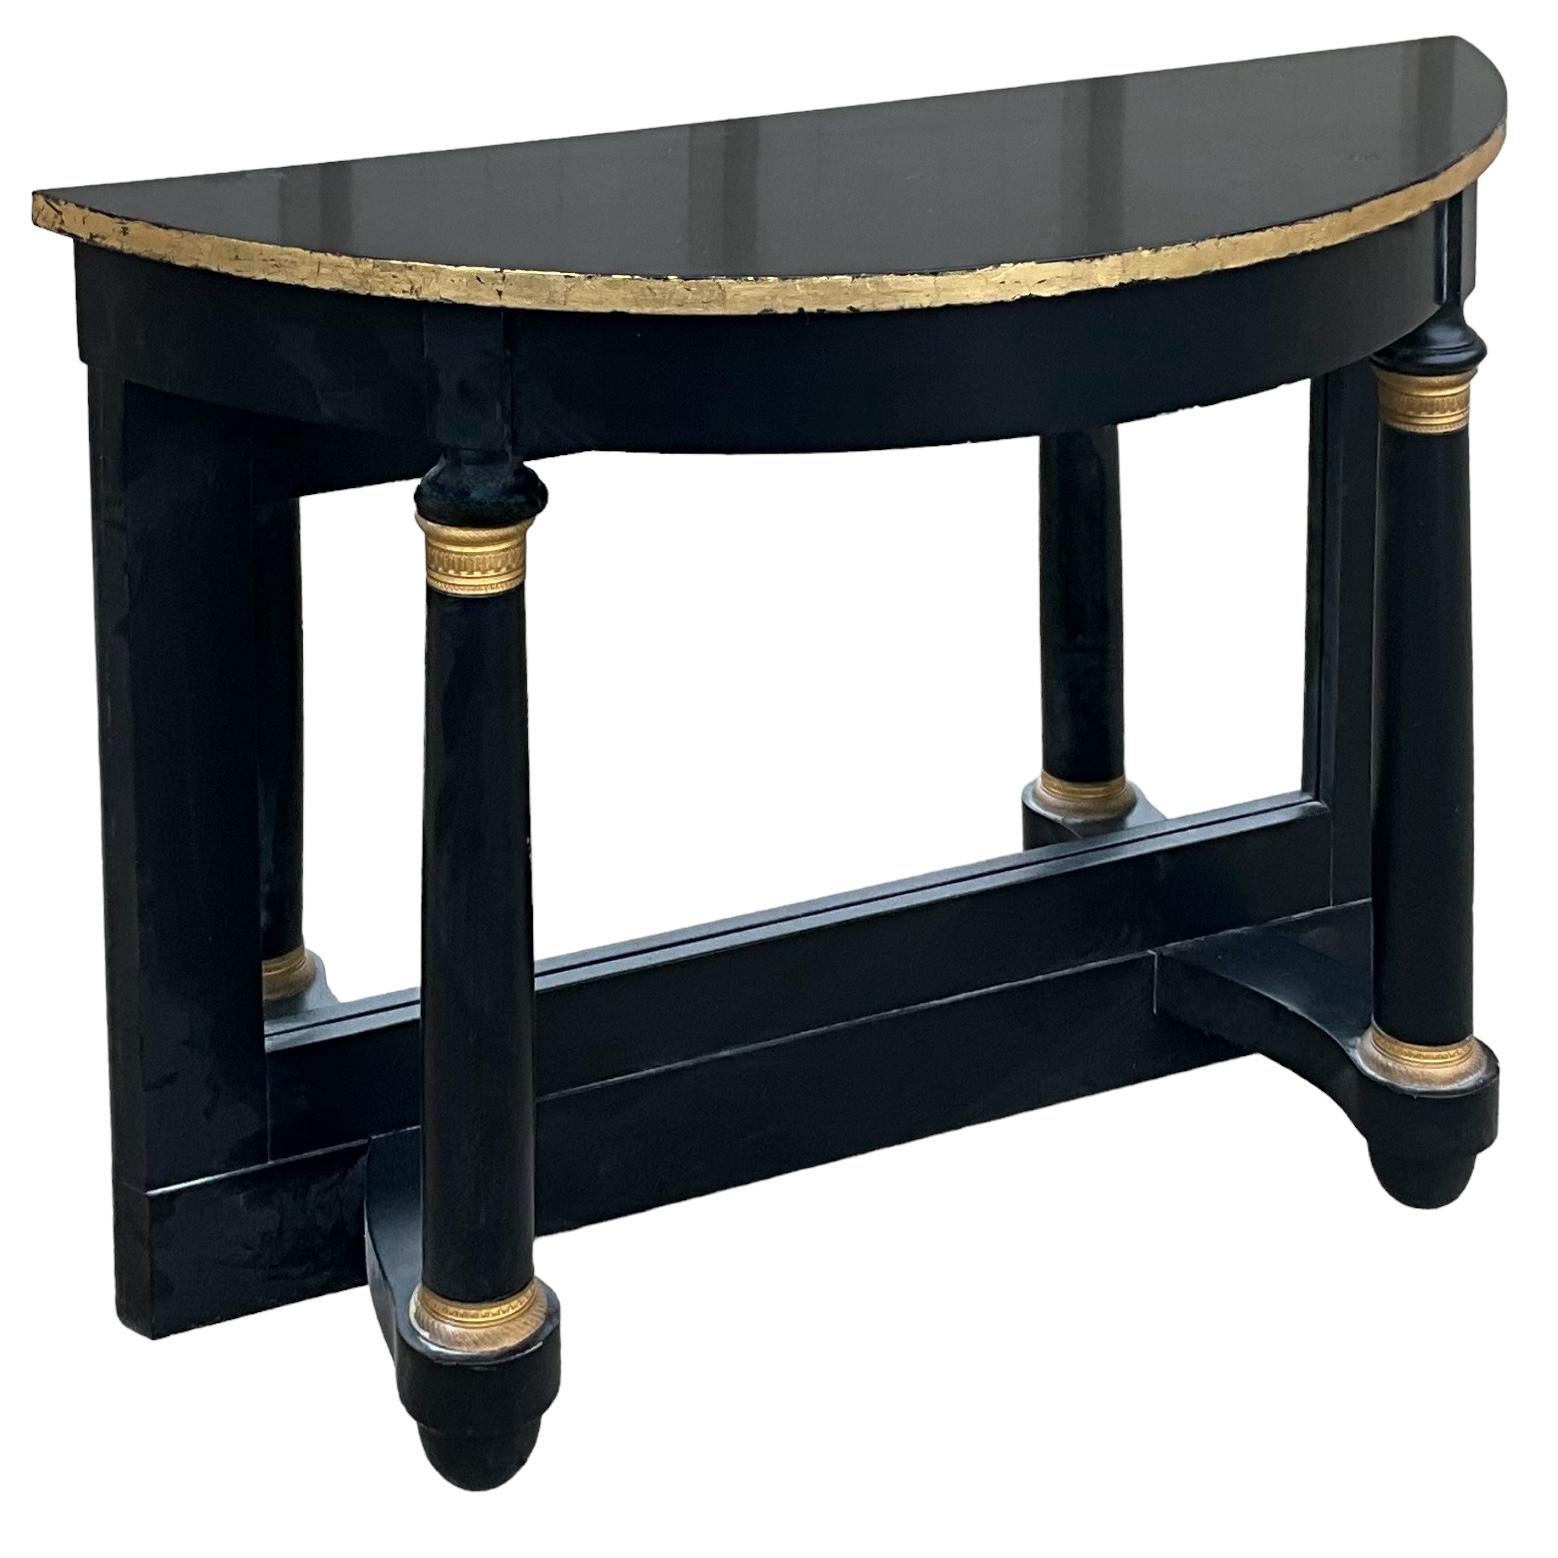 This is a pair of French neo-classical style black lacquered console tables by Maison Jansen. The backs are mirrored. Each turned support is banded in gilt bronze. The demilune topes are leafed in gold. They are marked and in very good